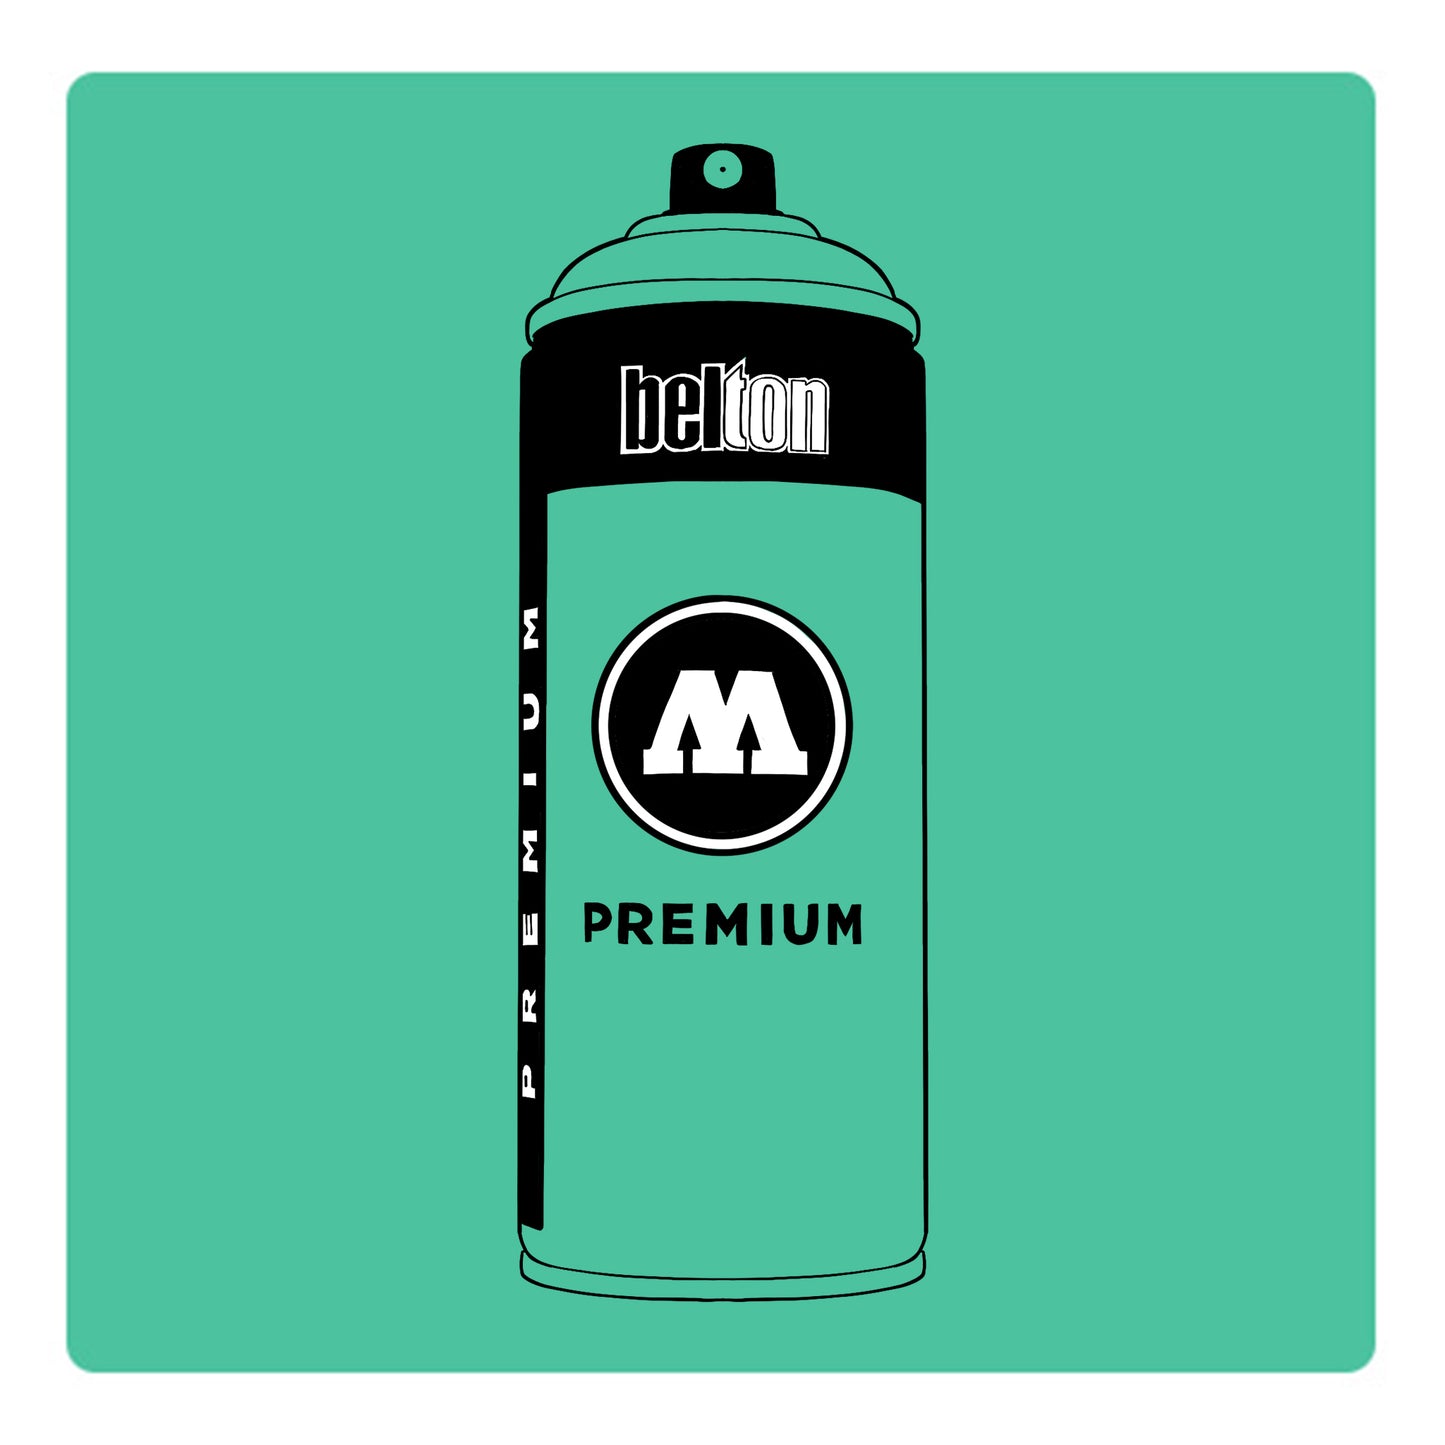 A black outline drawing of asea foam green spray paint can with the words "belton","premium" and the letter"M" written on the face in black and white font. The background is a color swatch of the same seafoam green with a white border